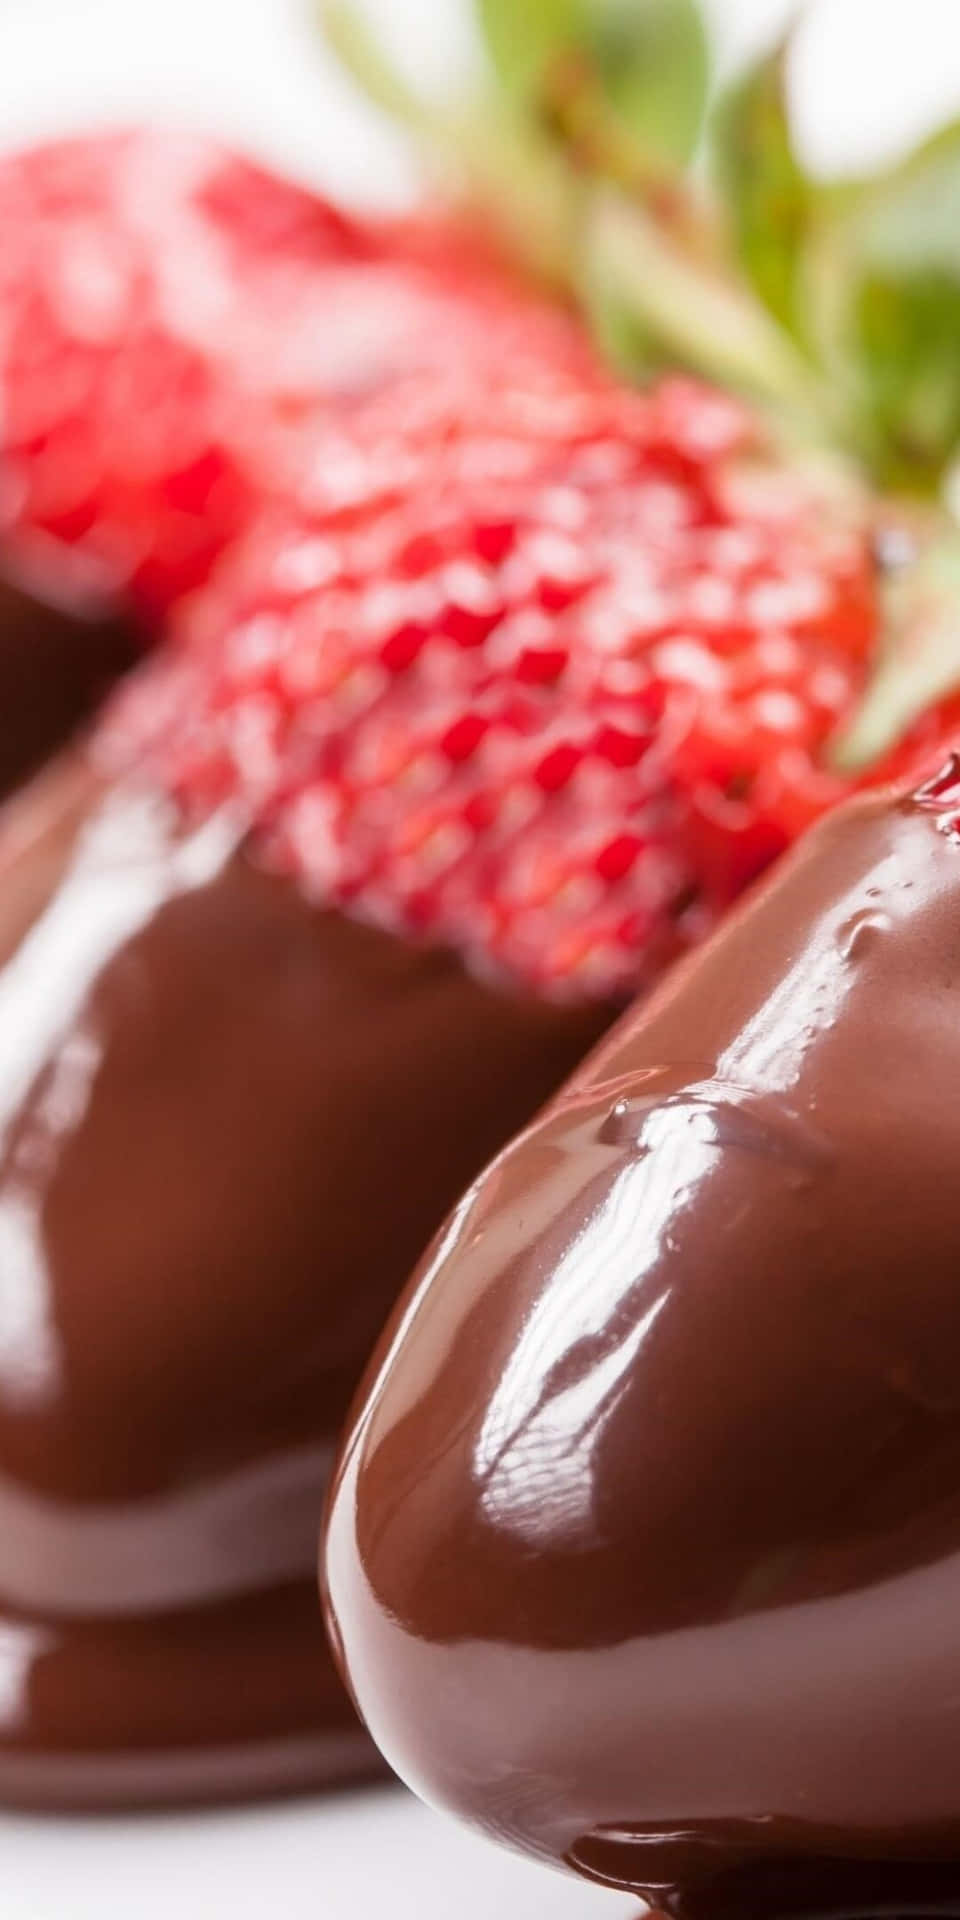 Chocolate Covered Strawberries With Strawberries